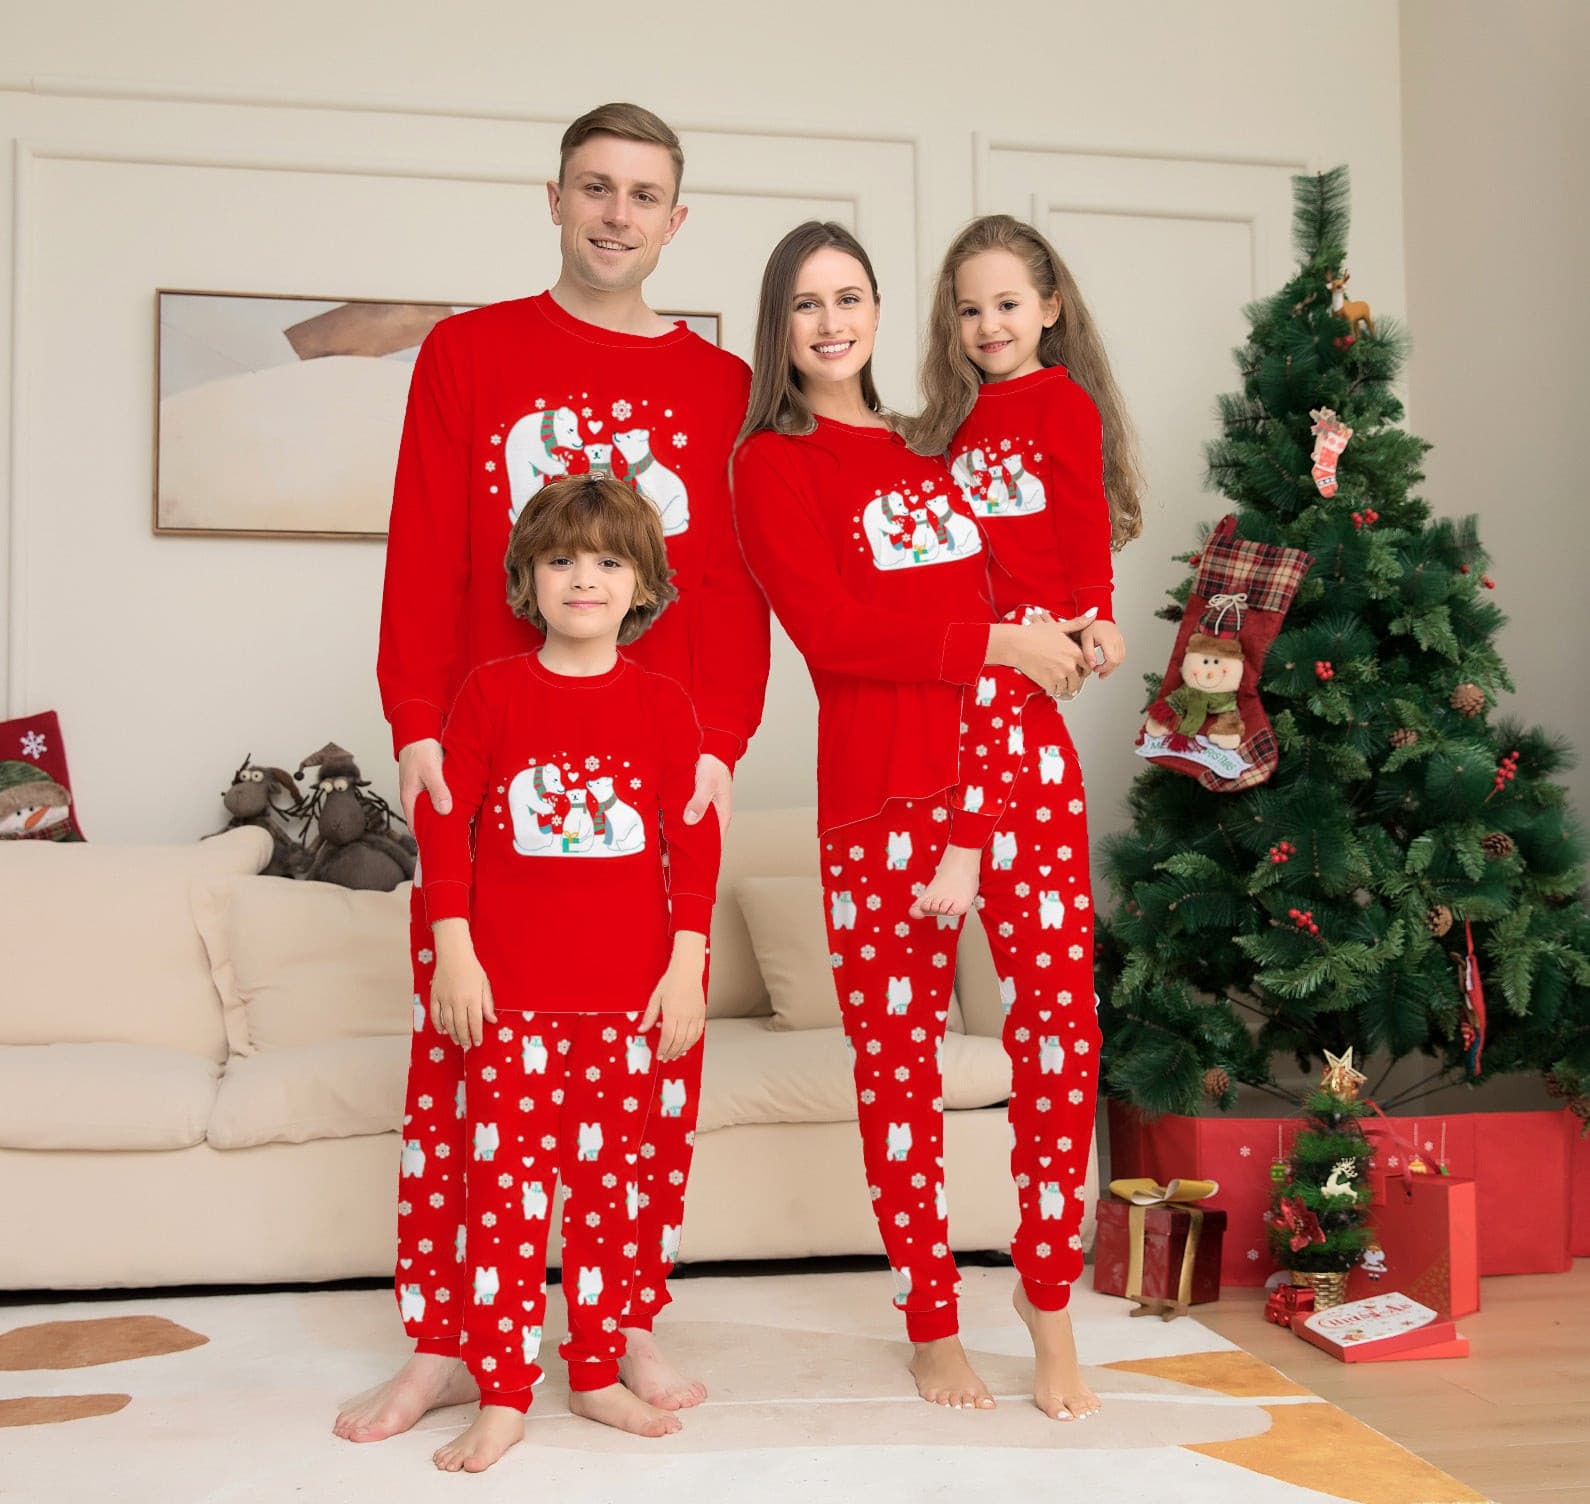 Christmas Family Pajamas Matching Sets Christmas Sleepwear Parent-Child Pjs Outfit For Christmas Holiday Xmas Party.